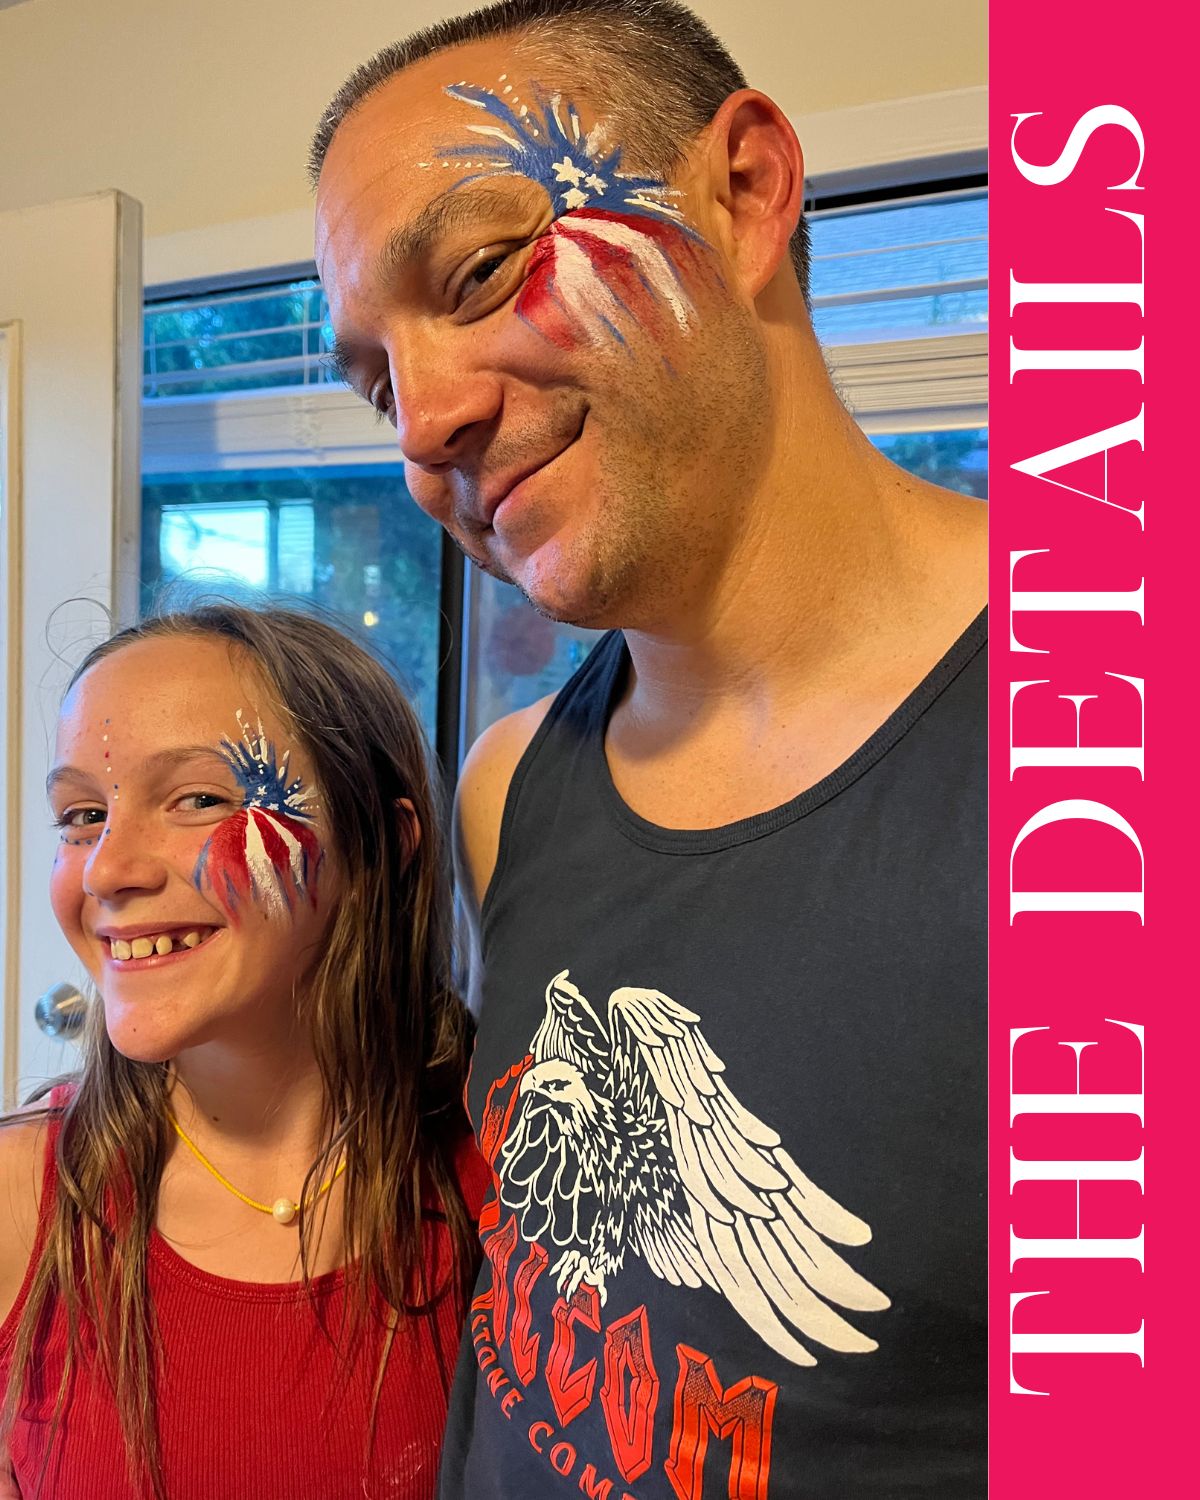 A dad and daughter with their faces painted